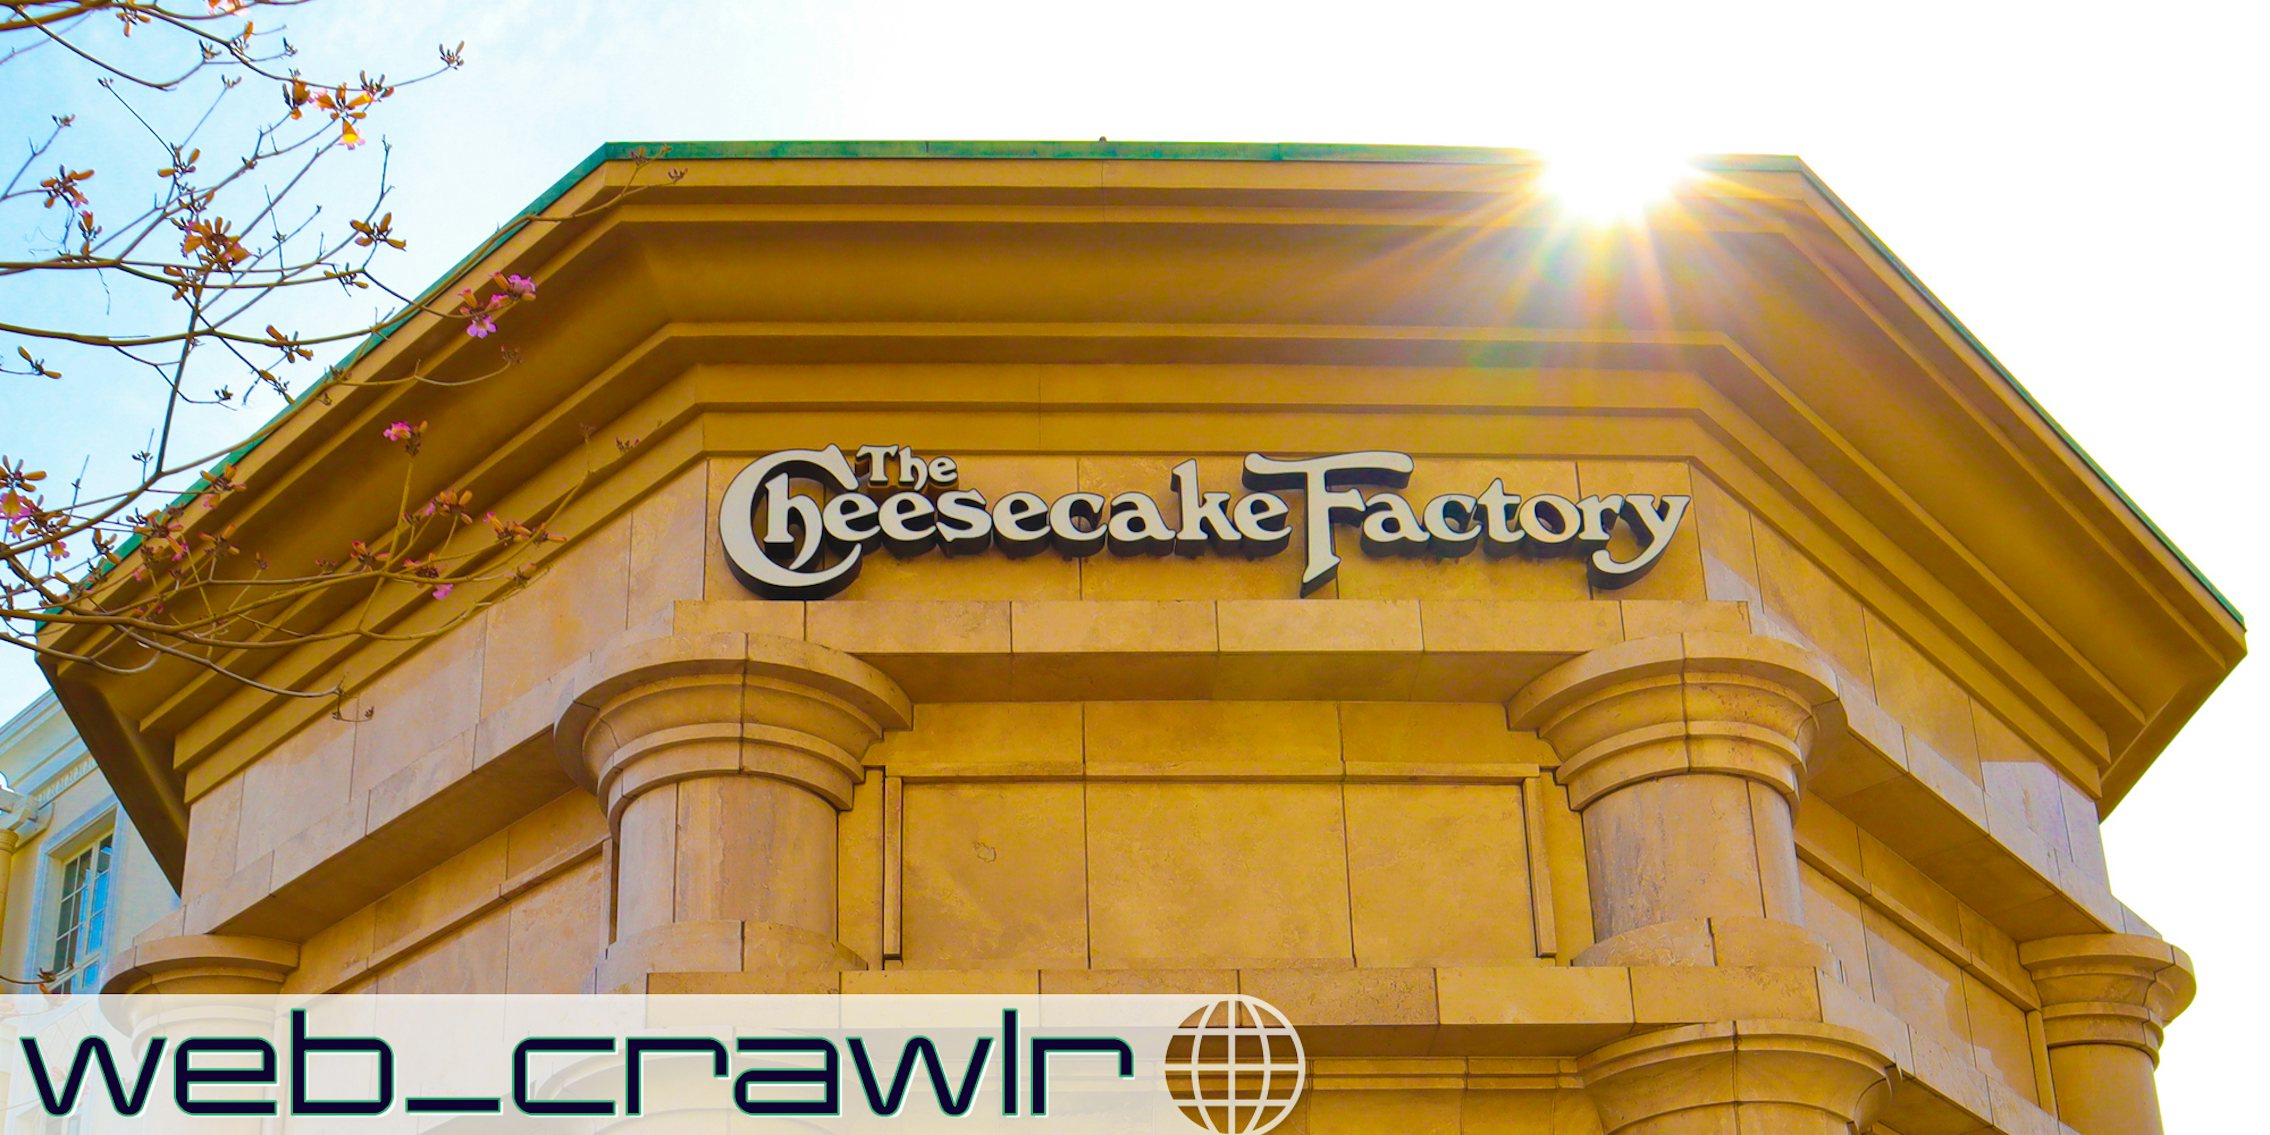 A Cheesecake Factory sign. The Daily Dot newsletter web_crawlr logo is in the bottom left corner.